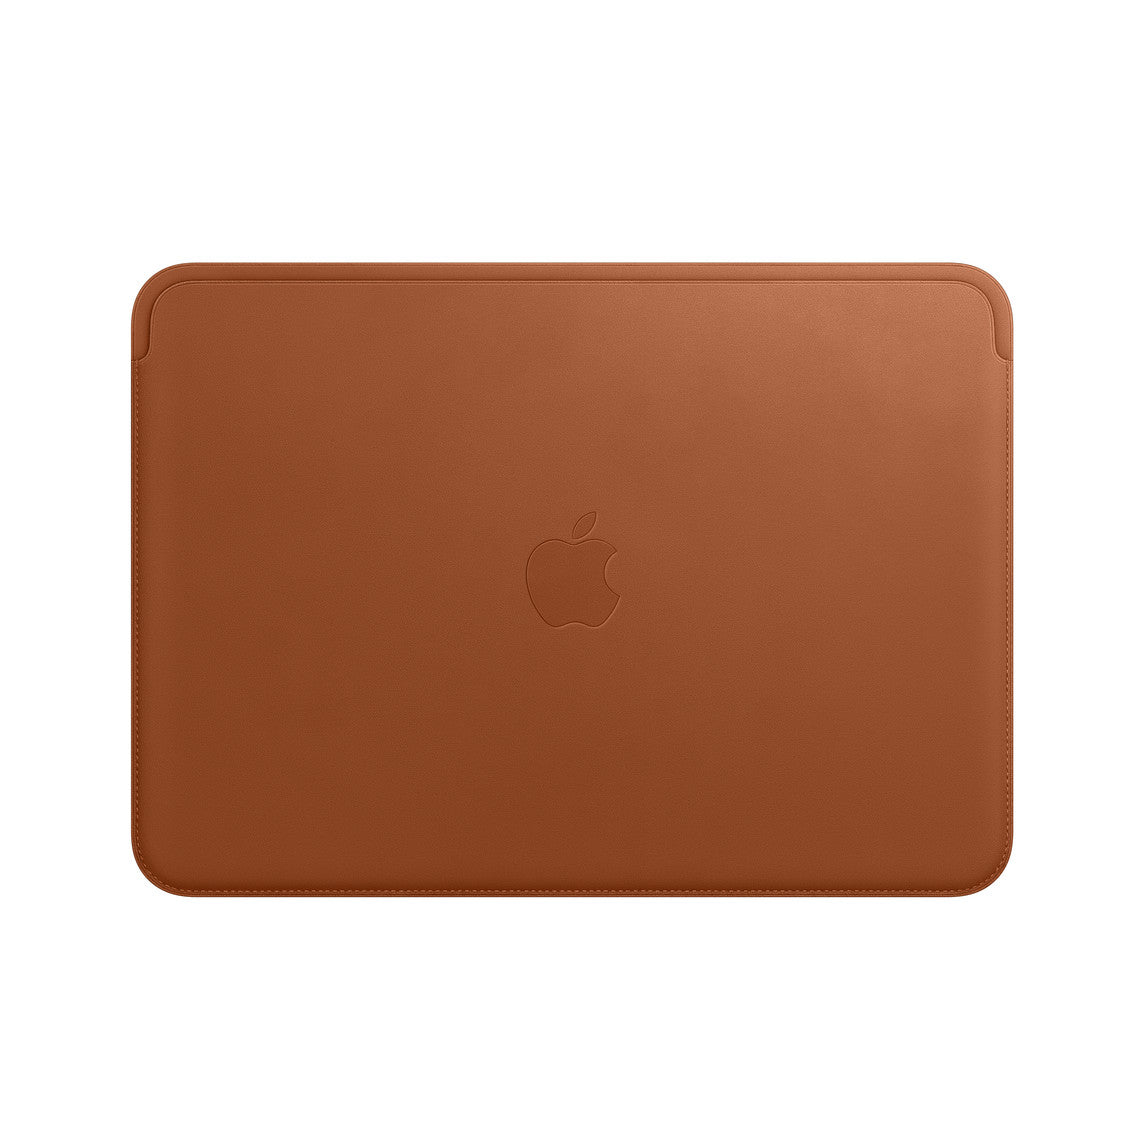 Apple MacBook Air and Pro 13in Leather Sleeve - Saddle Brown